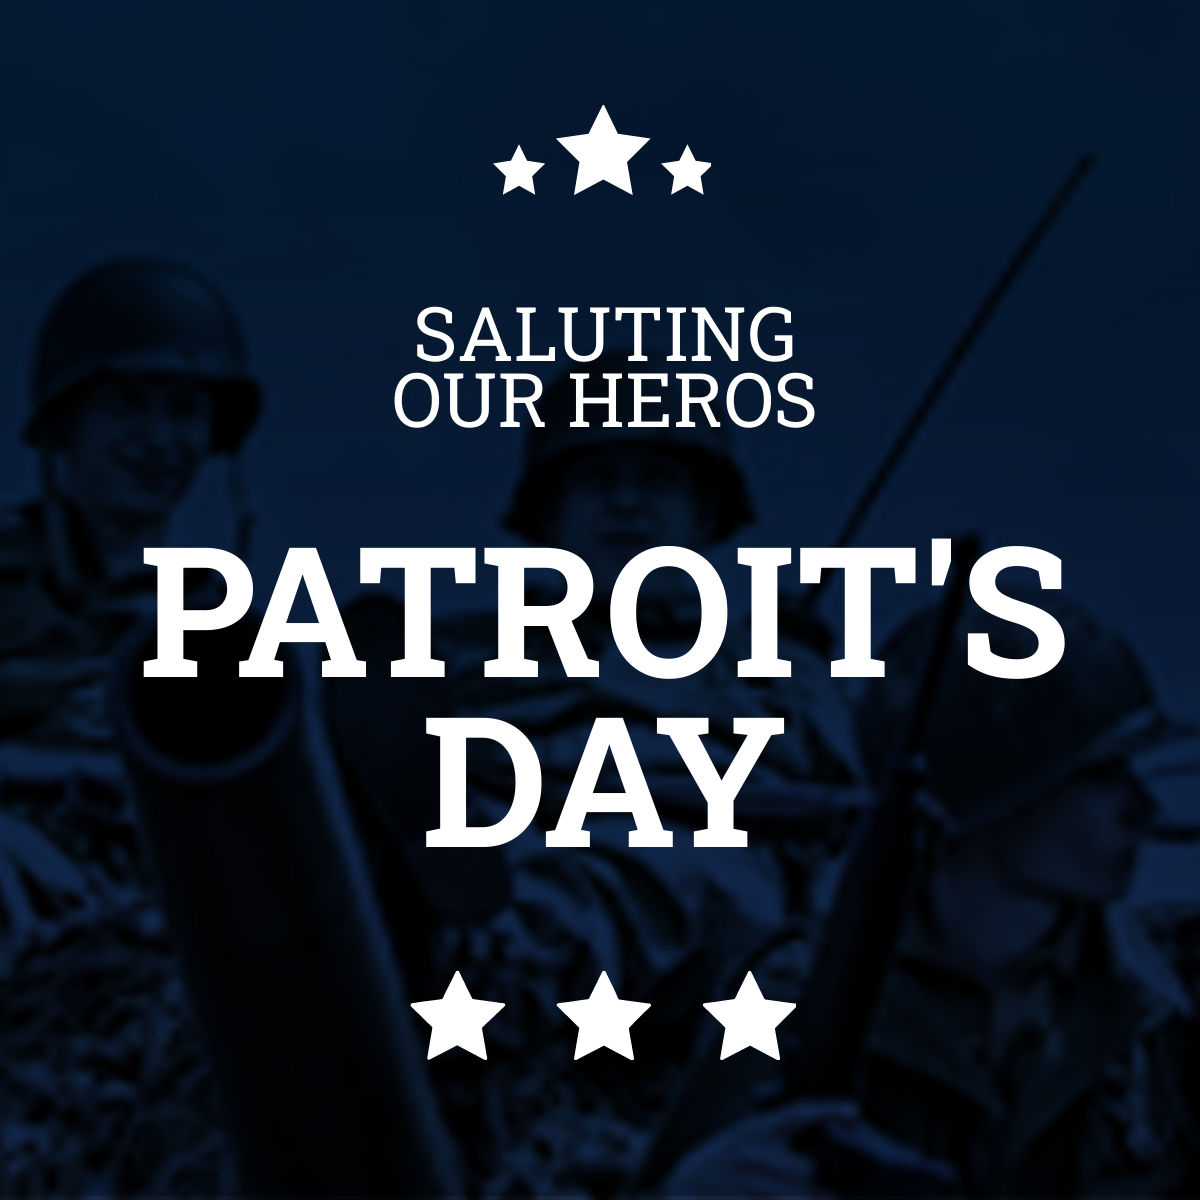 Patriot's Day Pinterest Board Cover Template